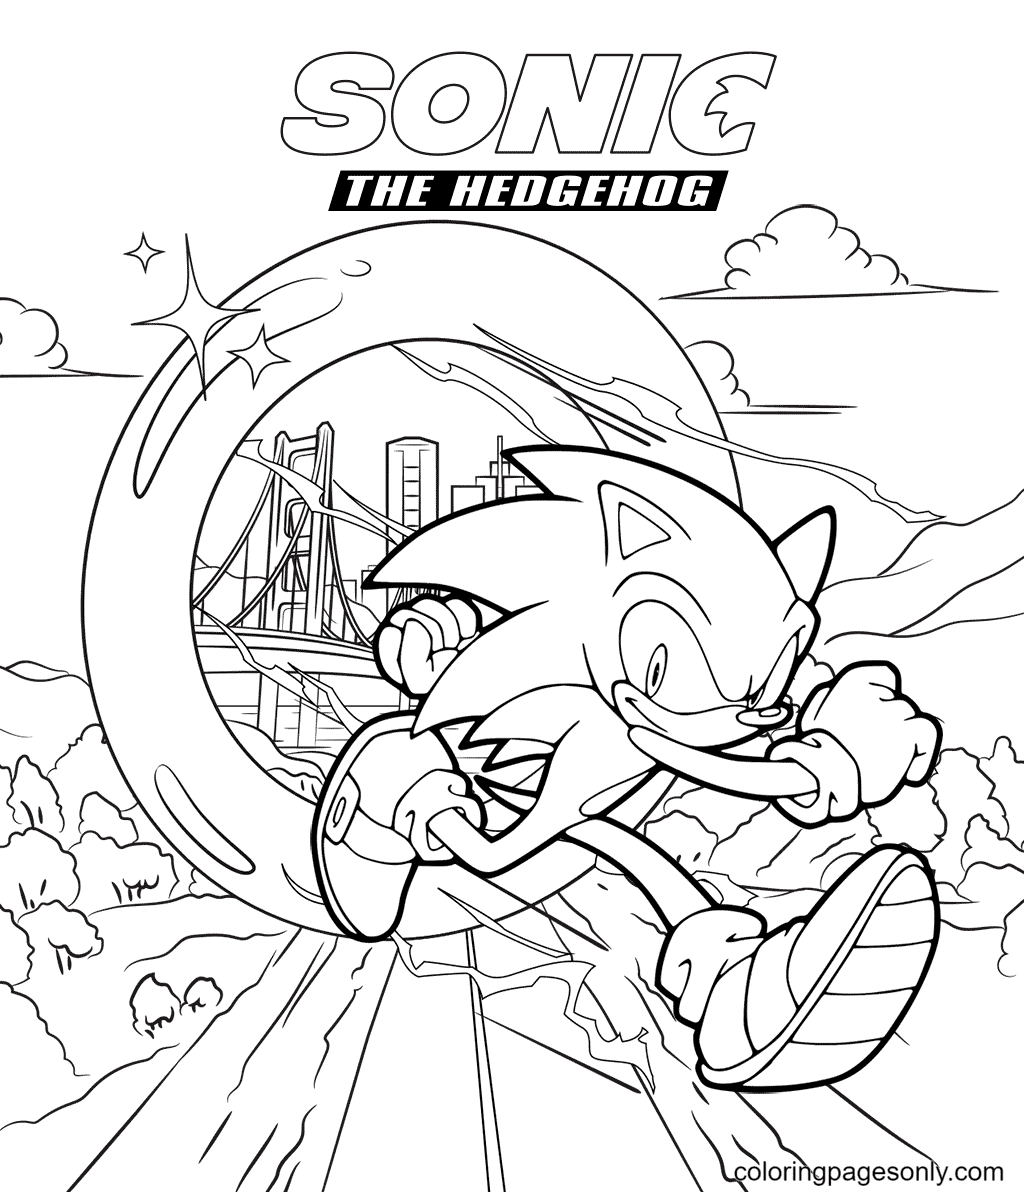 Naughty Sonic Coloring Pages - Sonic Coloring Pages - Coloring Pages For  Kids And Adults